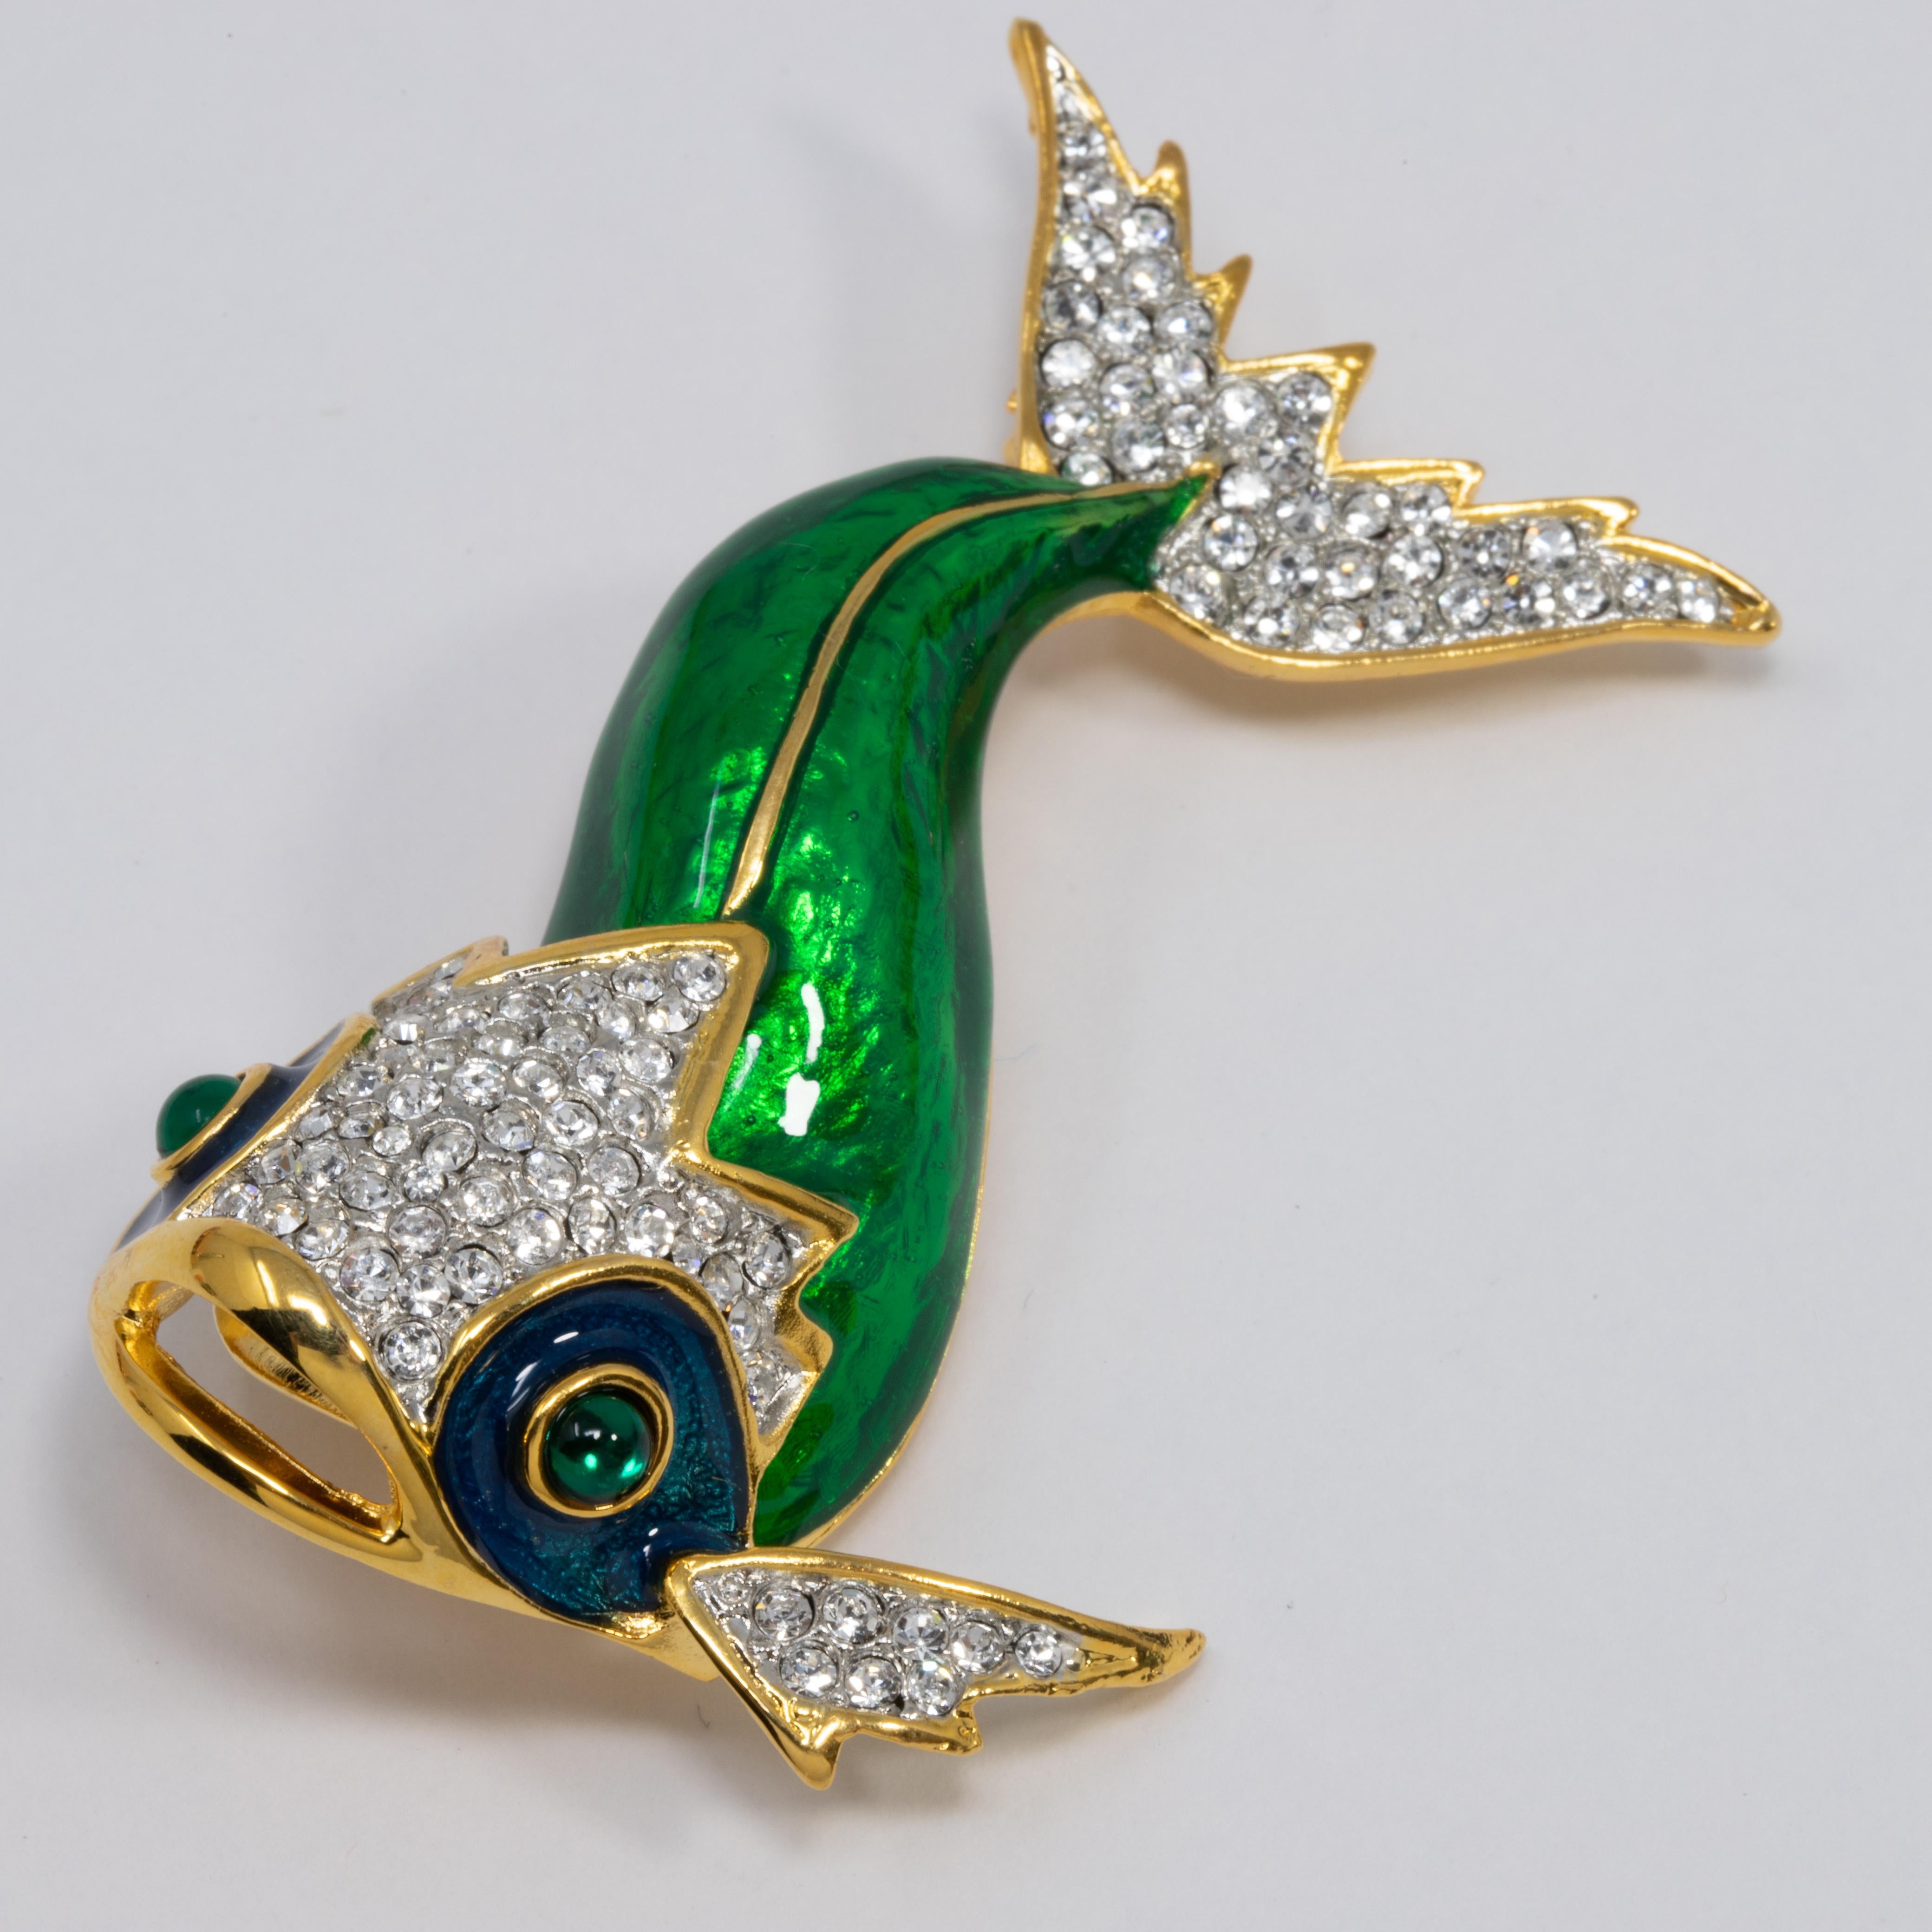 An embellished koi fish pin brooch by Kenneth Jay Lane. Features a painted green enamel body, accented with clear and green pave crystals. Set on gold plated metal.

Hallmarks: Kenneth Lane